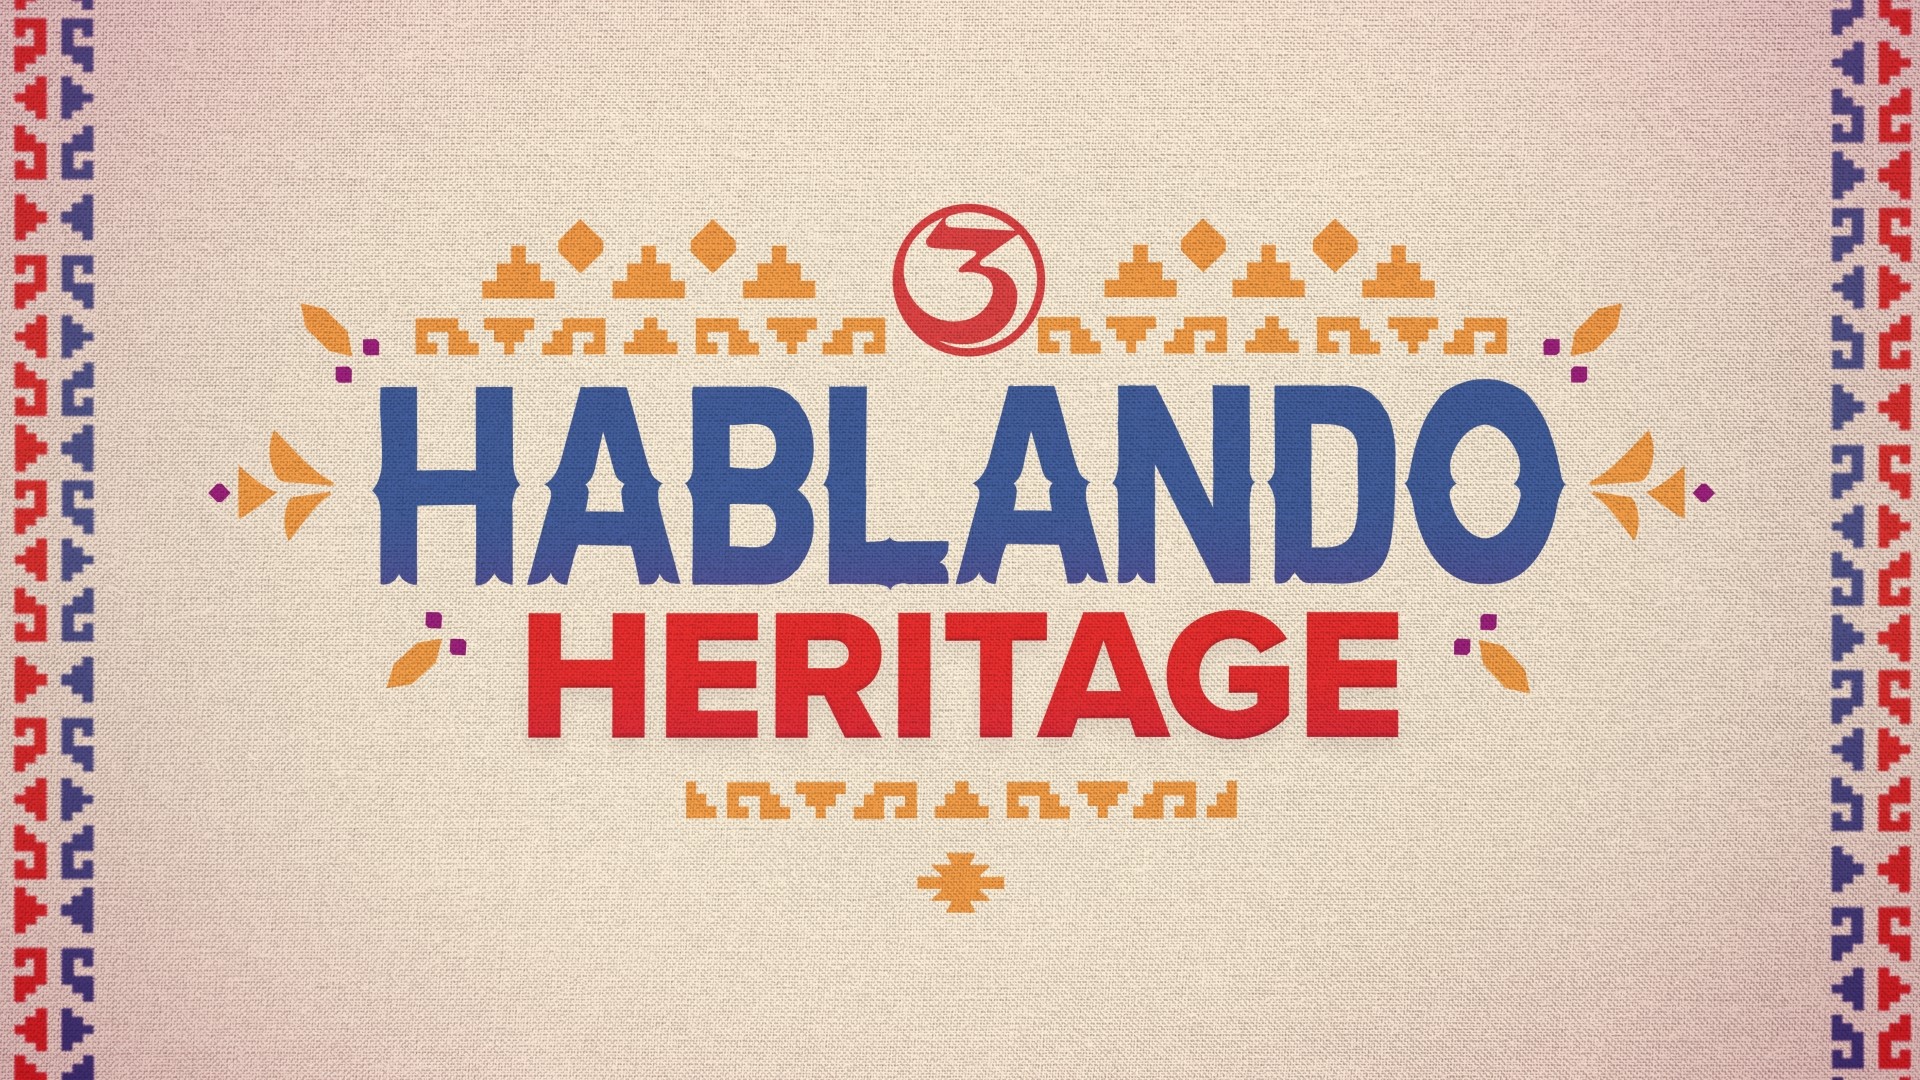 Coastal Bend residents discuss how they represent their Latino culture through language.